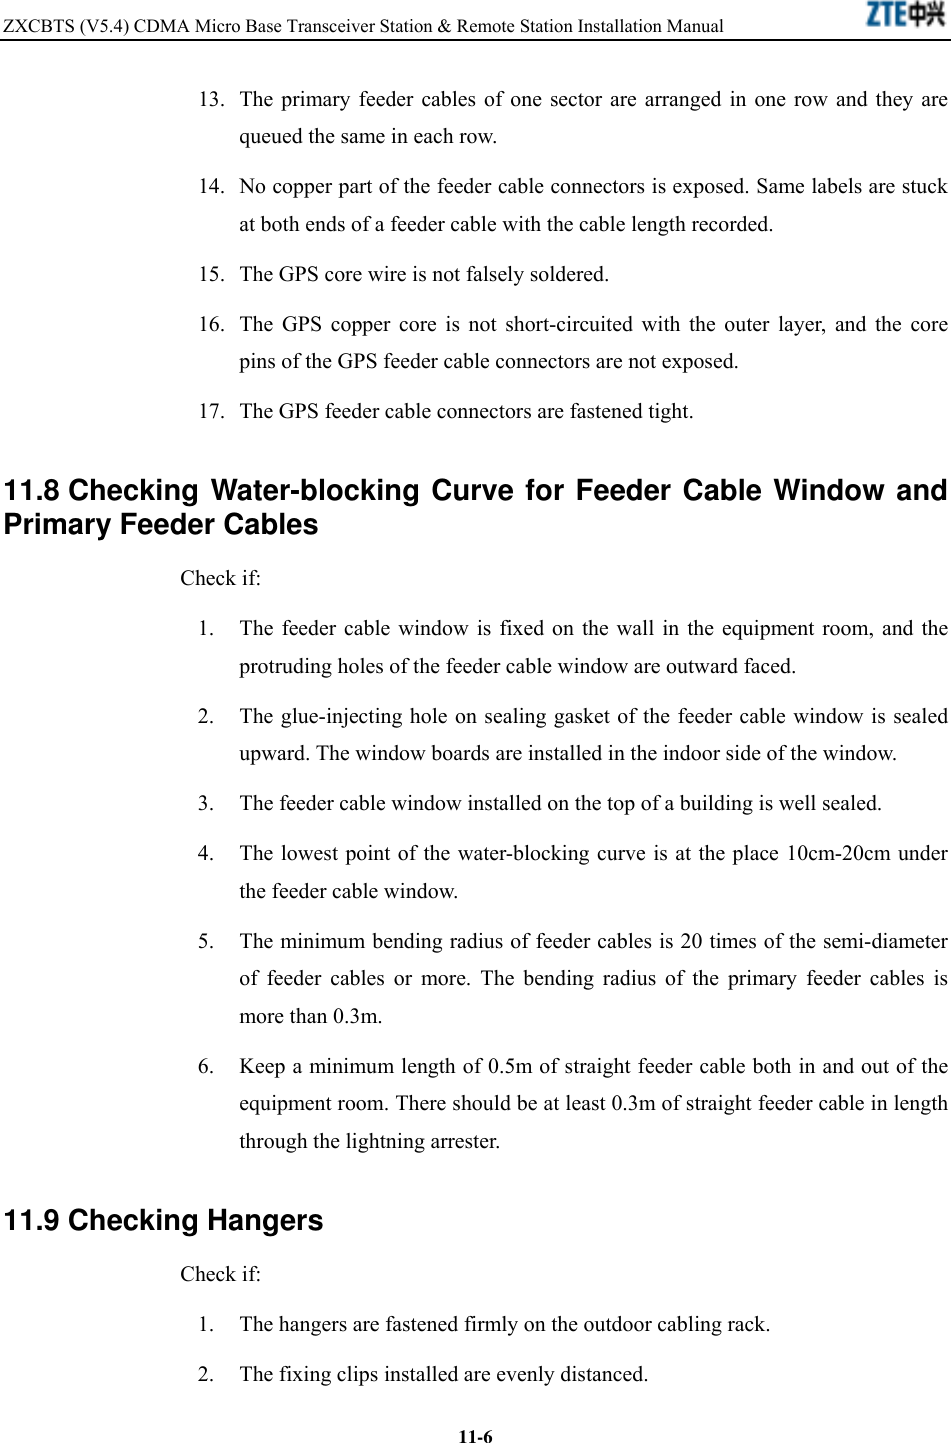 ZXCBTS (V5.4) CDMA Micro Base Transceiver Station &amp; Remote Station Installation Manual    11-613.  The primary feeder cables of one sector are arranged in one row and they are queued the same in each row. 14.  No copper part of the feeder cable connectors is exposed. Same labels are stuck at both ends of a feeder cable with the cable length recorded. 15.  The GPS core wire is not falsely soldered. 16.  The GPS copper core is not short-circuited with the outer layer, and the core pins of the GPS feeder cable connectors are not exposed. 17.  The GPS feeder cable connectors are fastened tight. 11.8 Checking Water-blocking Curve for Feeder Cable Window and Primary Feeder Cables Check if: 1.  The feeder cable window is fixed on the wall in the equipment room, and the protruding holes of the feeder cable window are outward faced. 2.  The glue-injecting hole on sealing gasket of the feeder cable window is sealed upward. The window boards are installed in the indoor side of the window. 3.  The feeder cable window installed on the top of a building is well sealed. 4.  The lowest point of the water-blocking curve is at the place 10cm-20cm under the feeder cable window. 5.  The minimum bending radius of feeder cables is 20 times of the semi-diameter of feeder cables or more. The bending radius of the primary feeder cables is more than 0.3m. 6.  Keep a minimum length of 0.5m of straight feeder cable both in and out of the equipment room. There should be at least 0.3m of straight feeder cable in length through the lightning arrester. 11.9 Checking Hangers Check if: 1.  The hangers are fastened firmly on the outdoor cabling rack. 2.  The fixing clips installed are evenly distanced. 